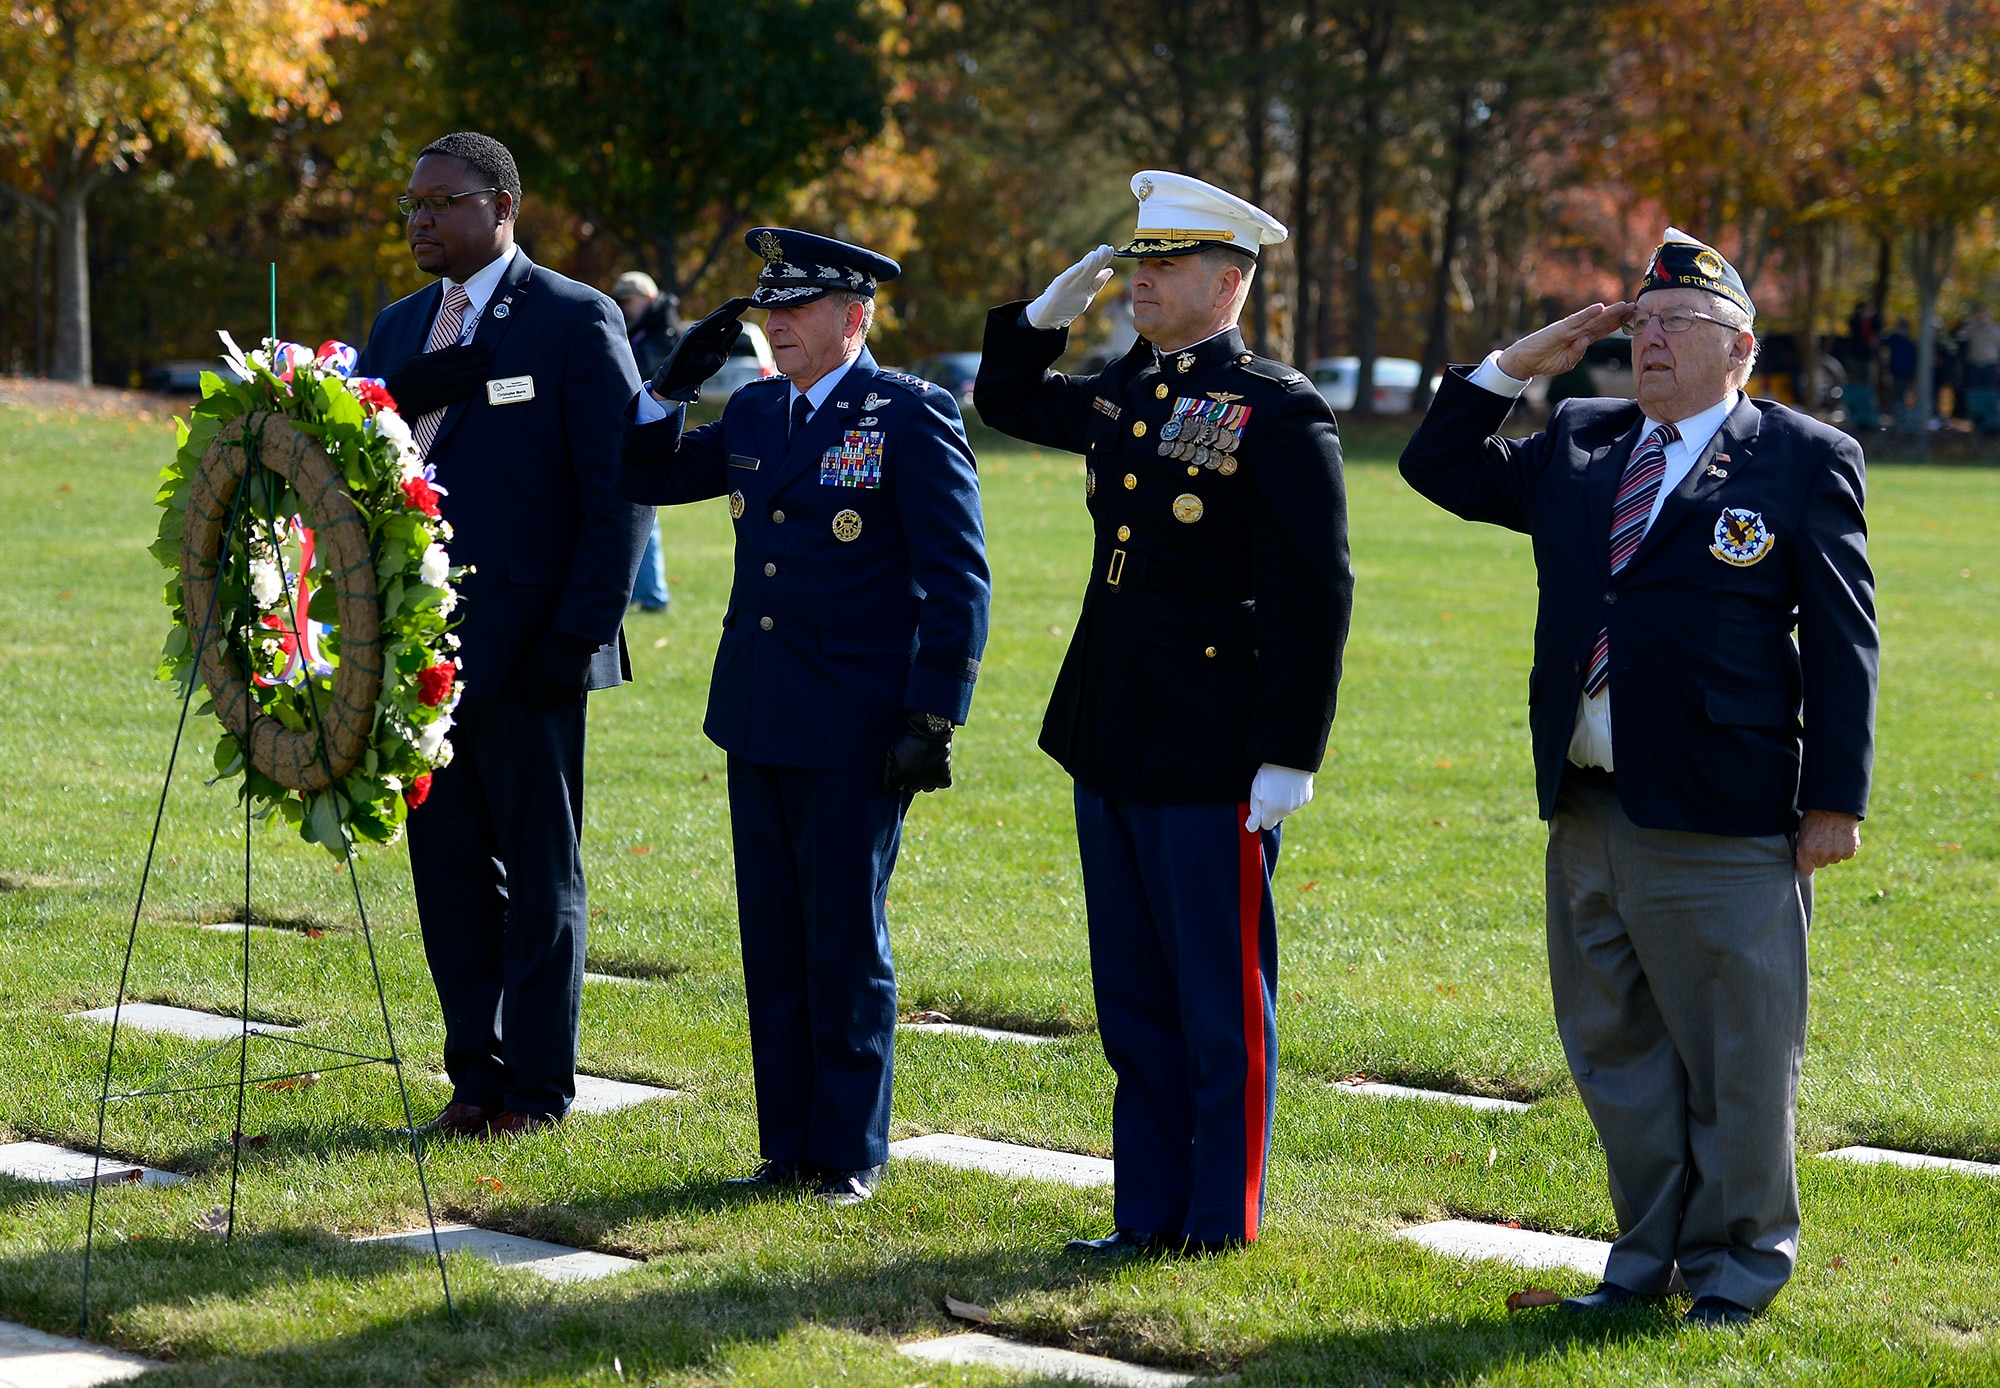 Air Force Chief of Staff Gen. David L. Goldfein salutes after placing a wreath during a Veterans Day ceremony at Quantico National Cemetery in Quantico, Va., Nov. 11, 2017. The Veterans Day ceremony is an annual event hosted by the Potomac Region Veterans Council. The event featured a performance by the Quantico Marine Corps Band. (U.S. Air Force photo by Tech. Sgt. Dan DeCook)